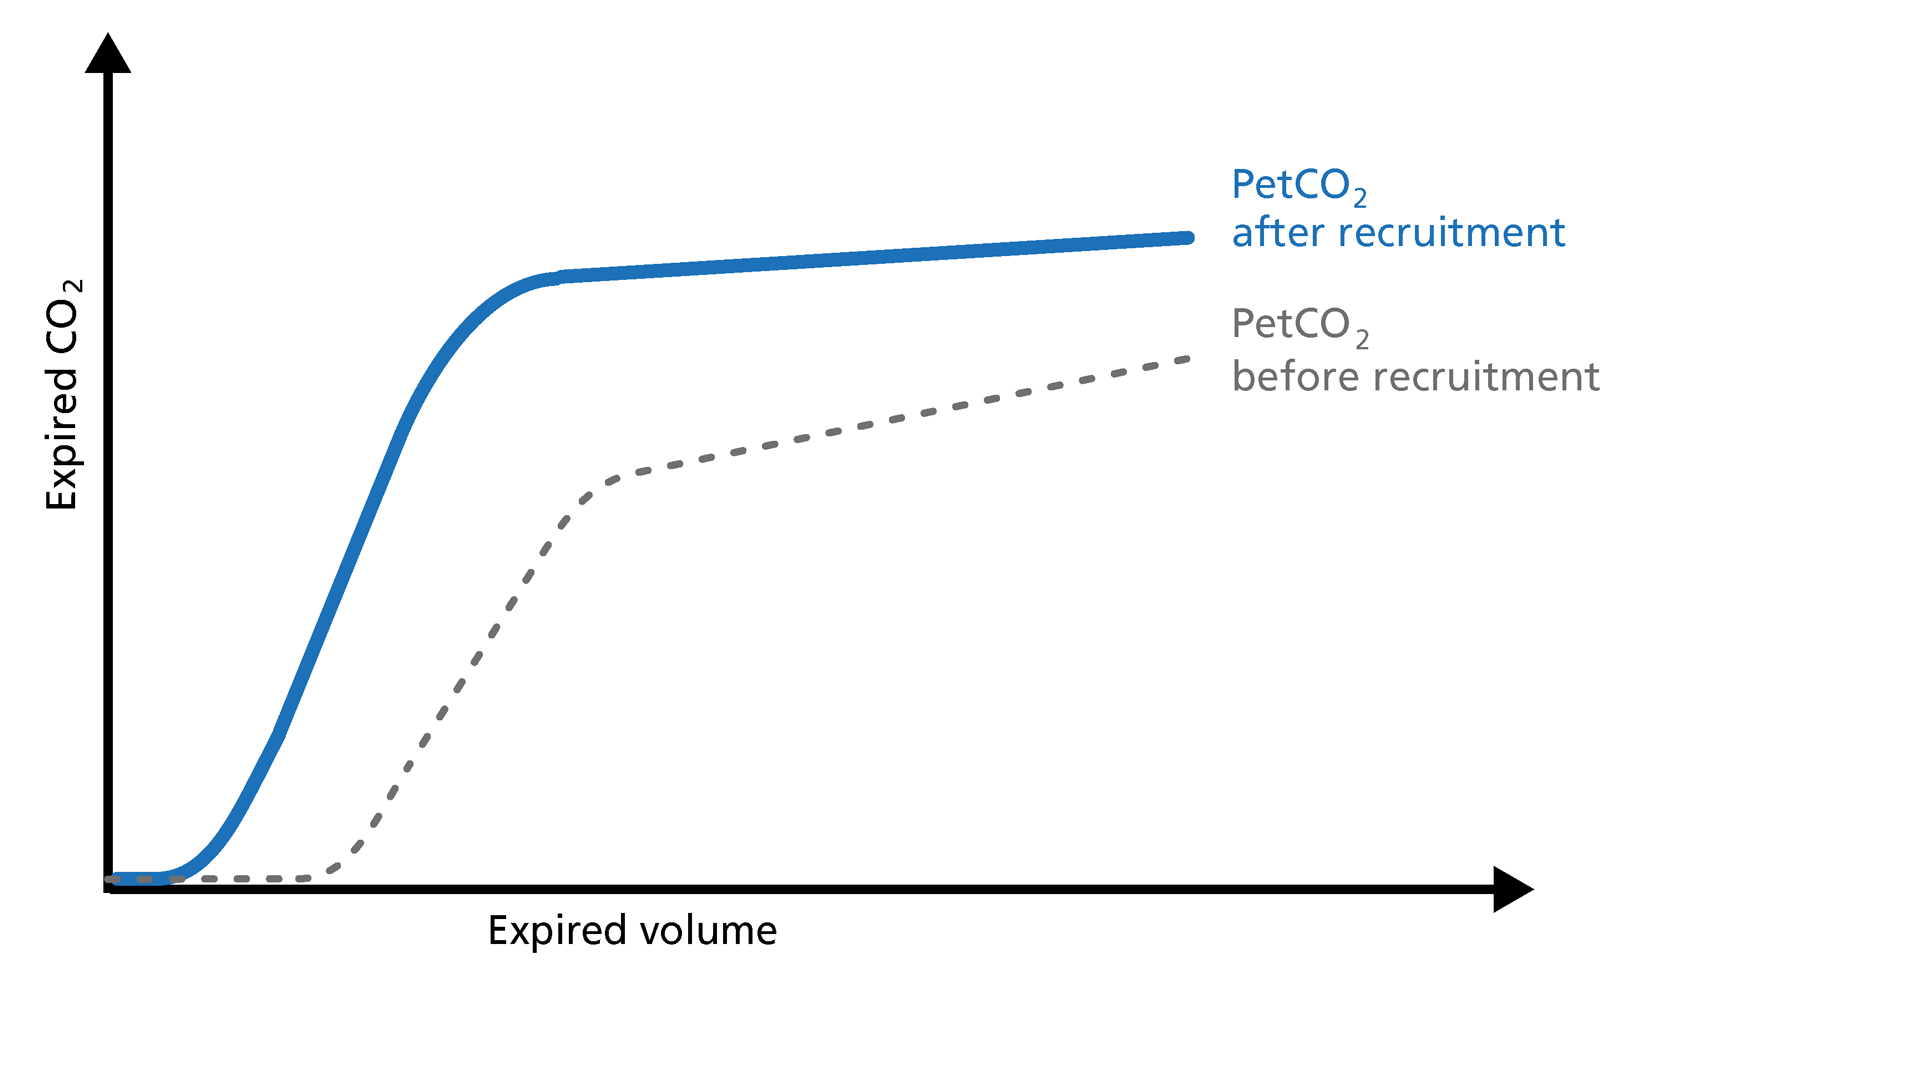 Illustration of PetCO2 before and after recruitment